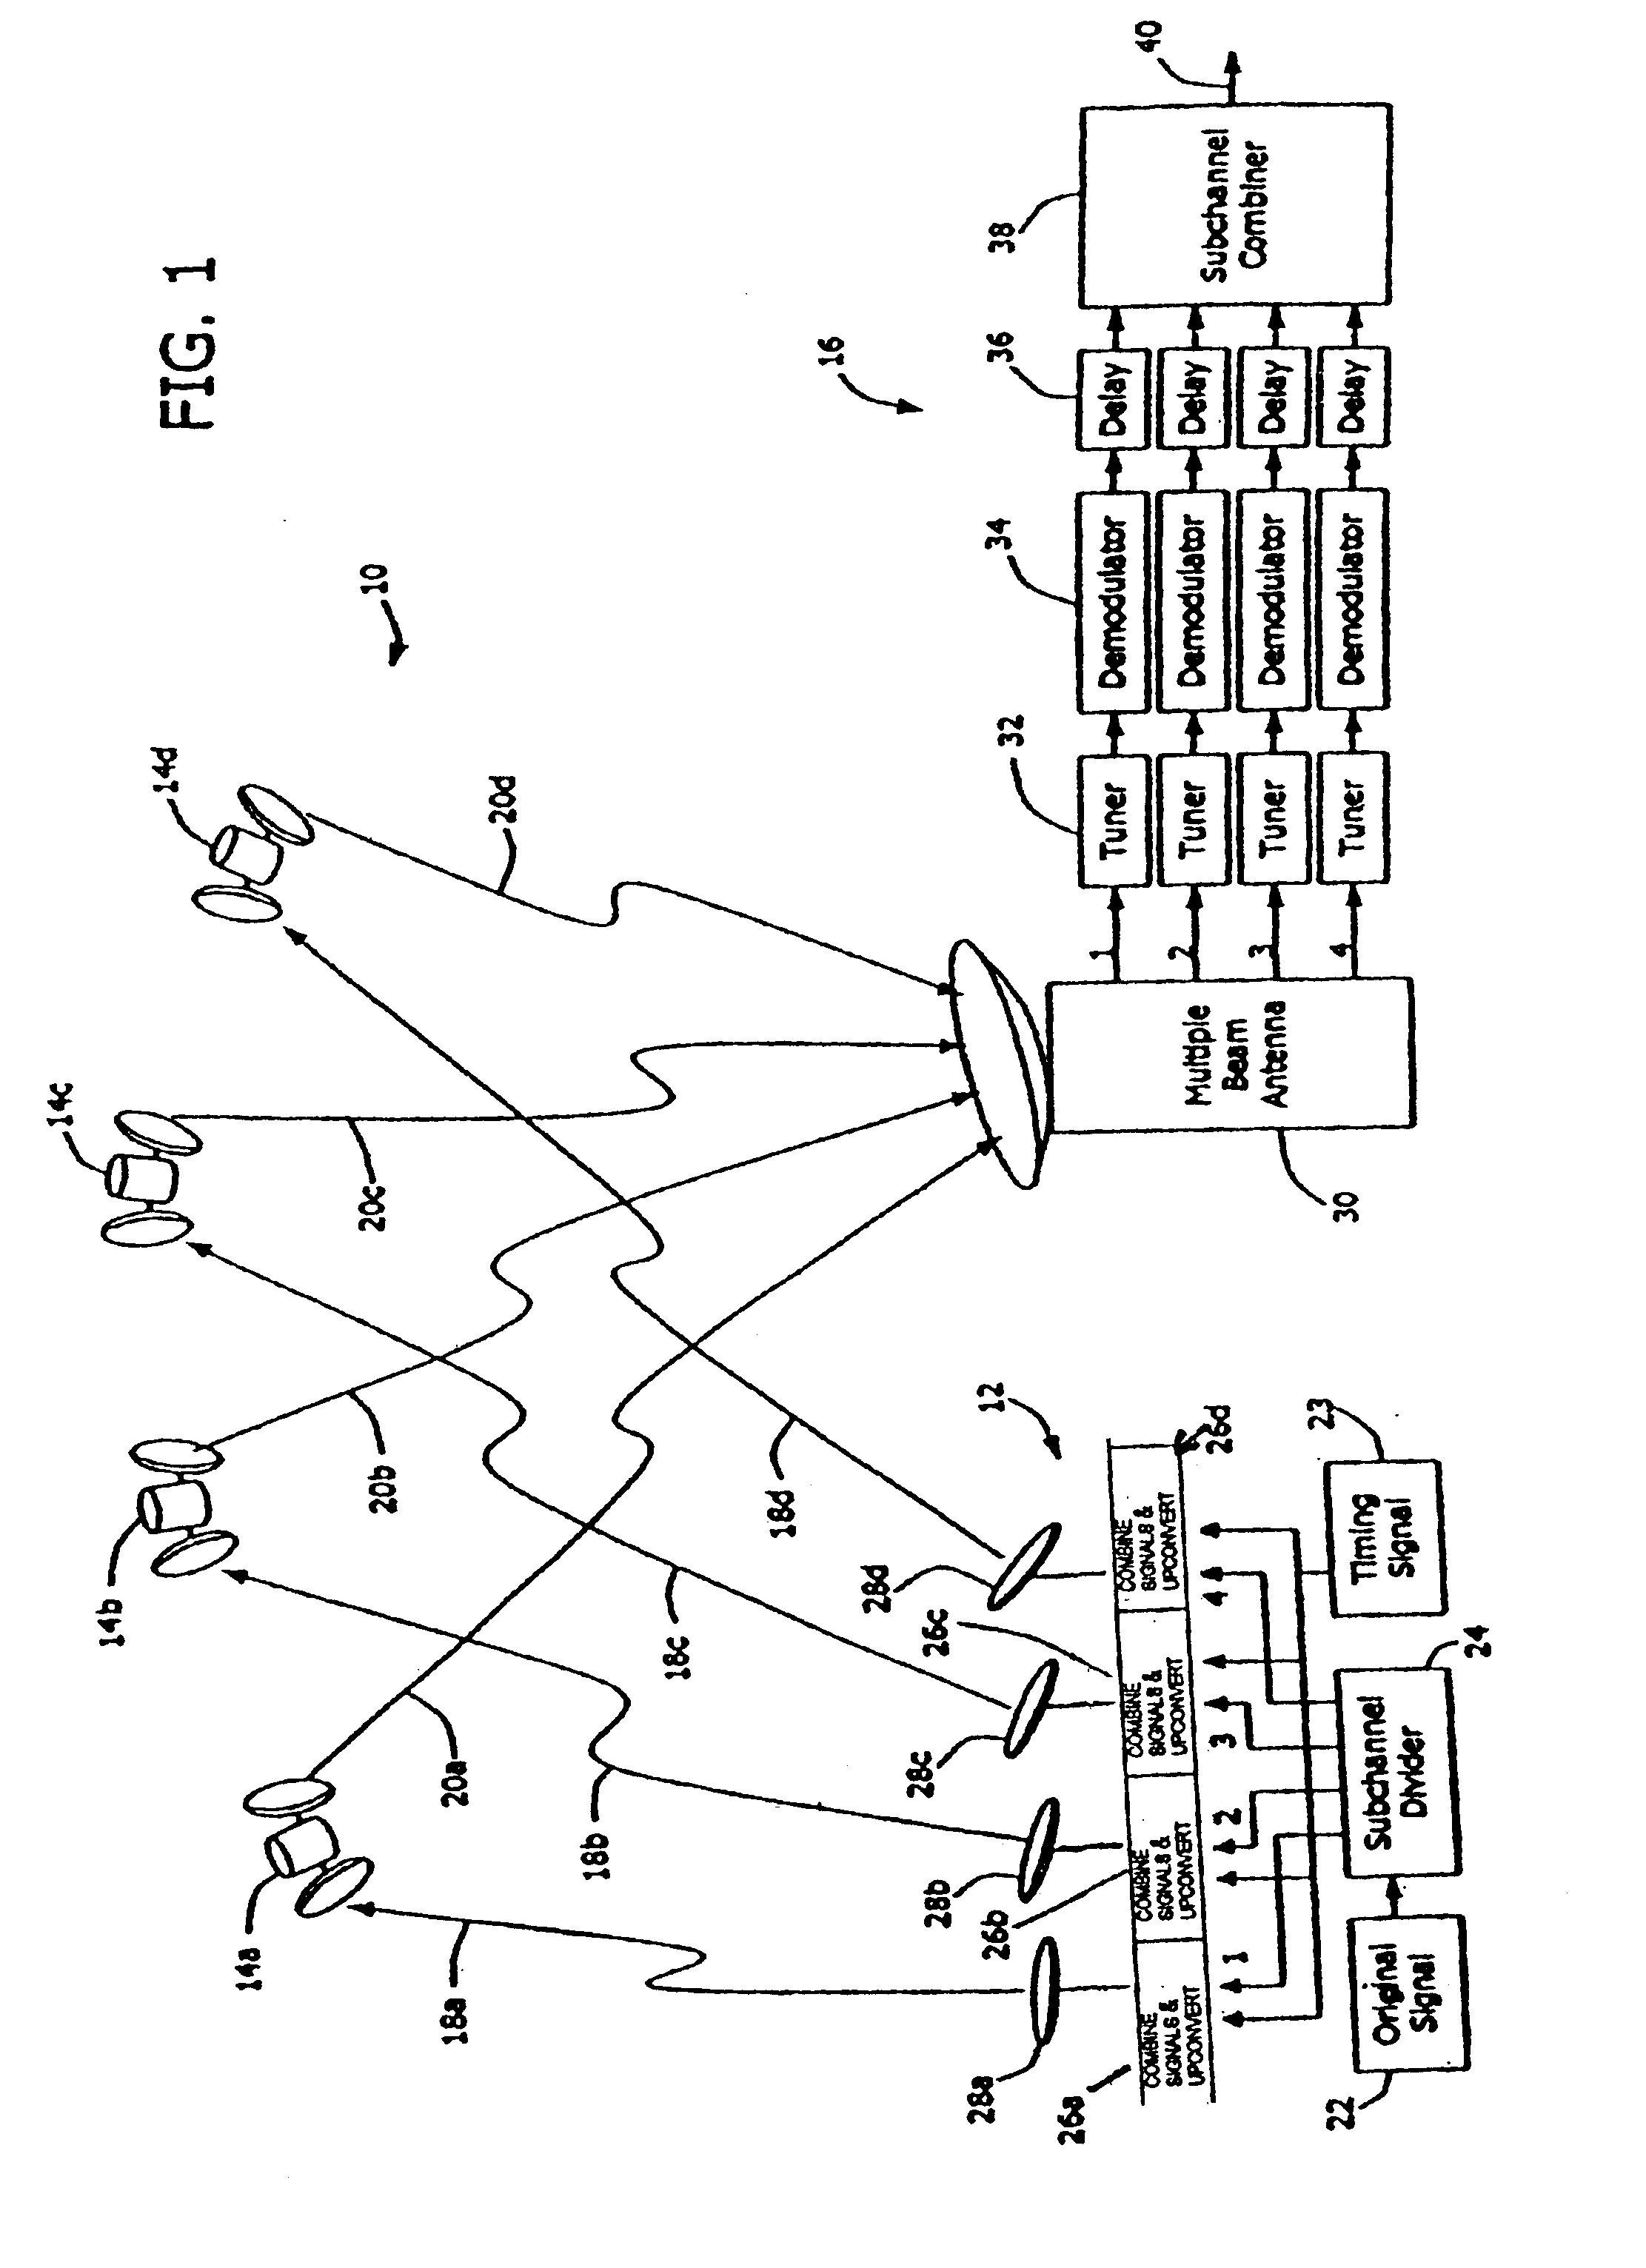 System and method for combining multiple satellite channels into a virtual composite channel